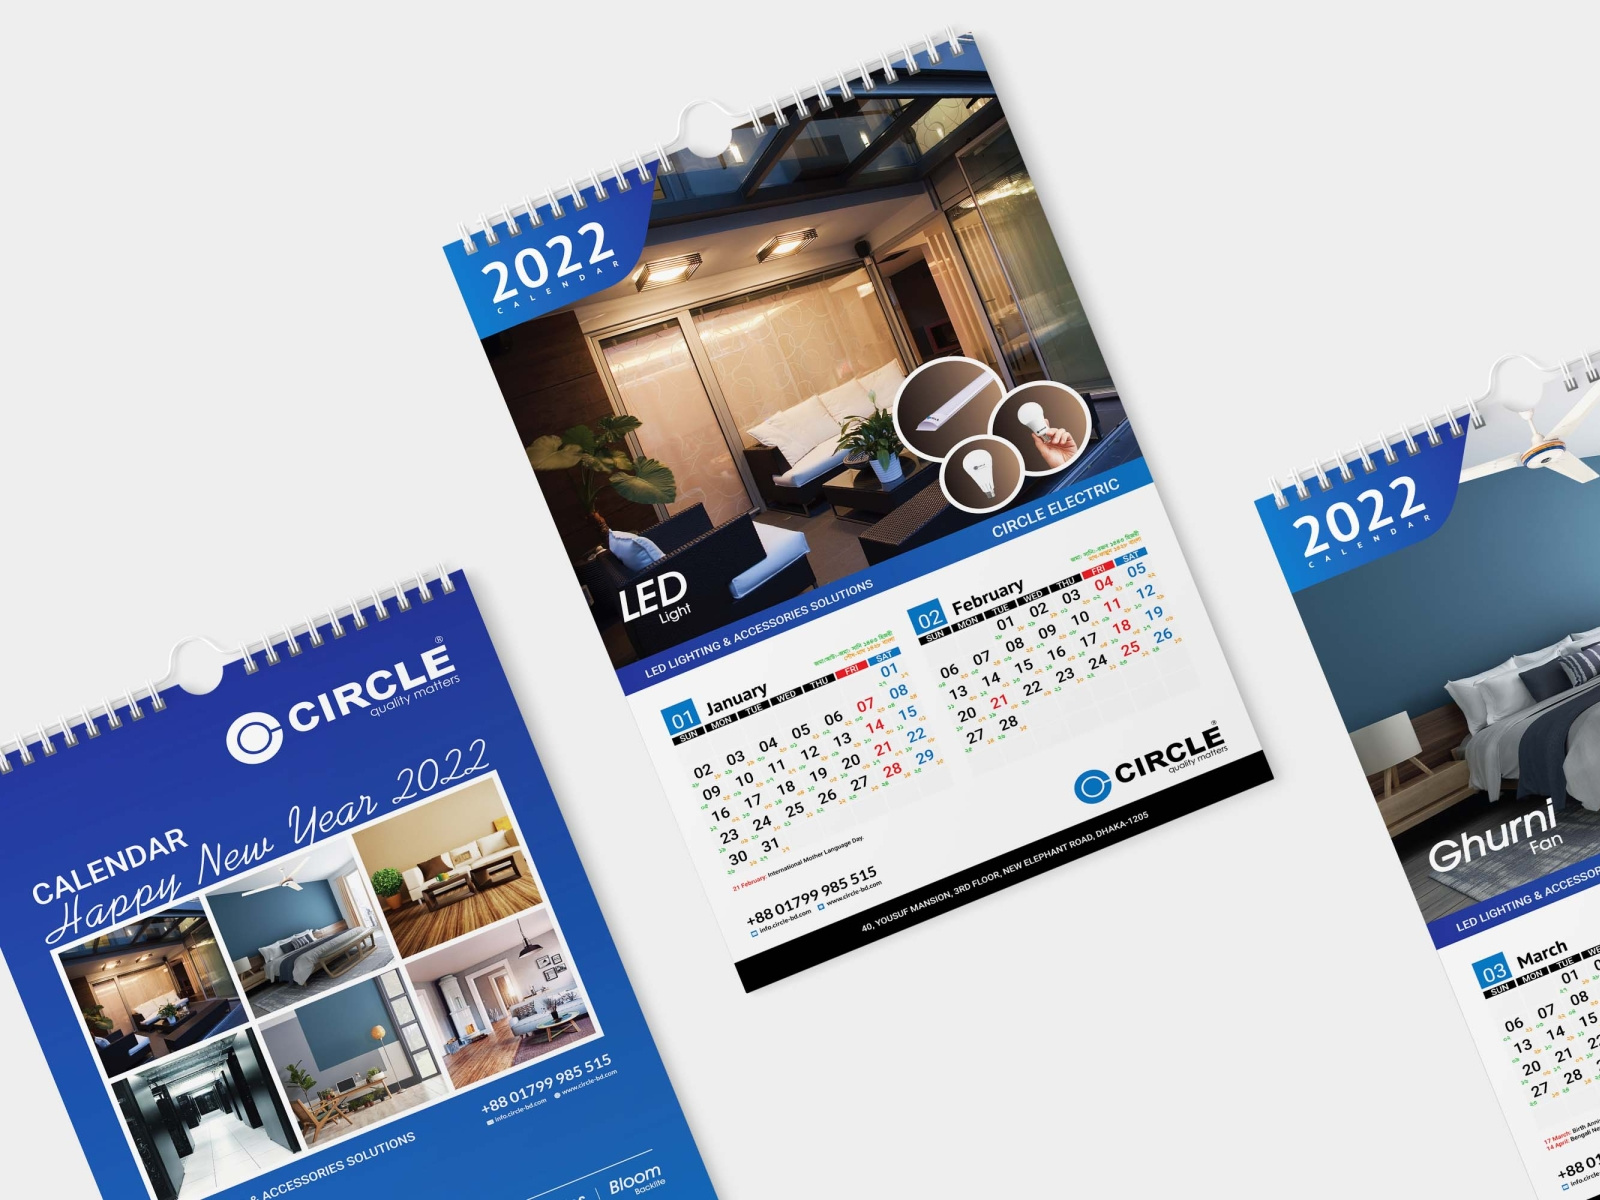 Circle Electric Wall Calendar 2022 by Zia Uddin Ahmed on Dribbble